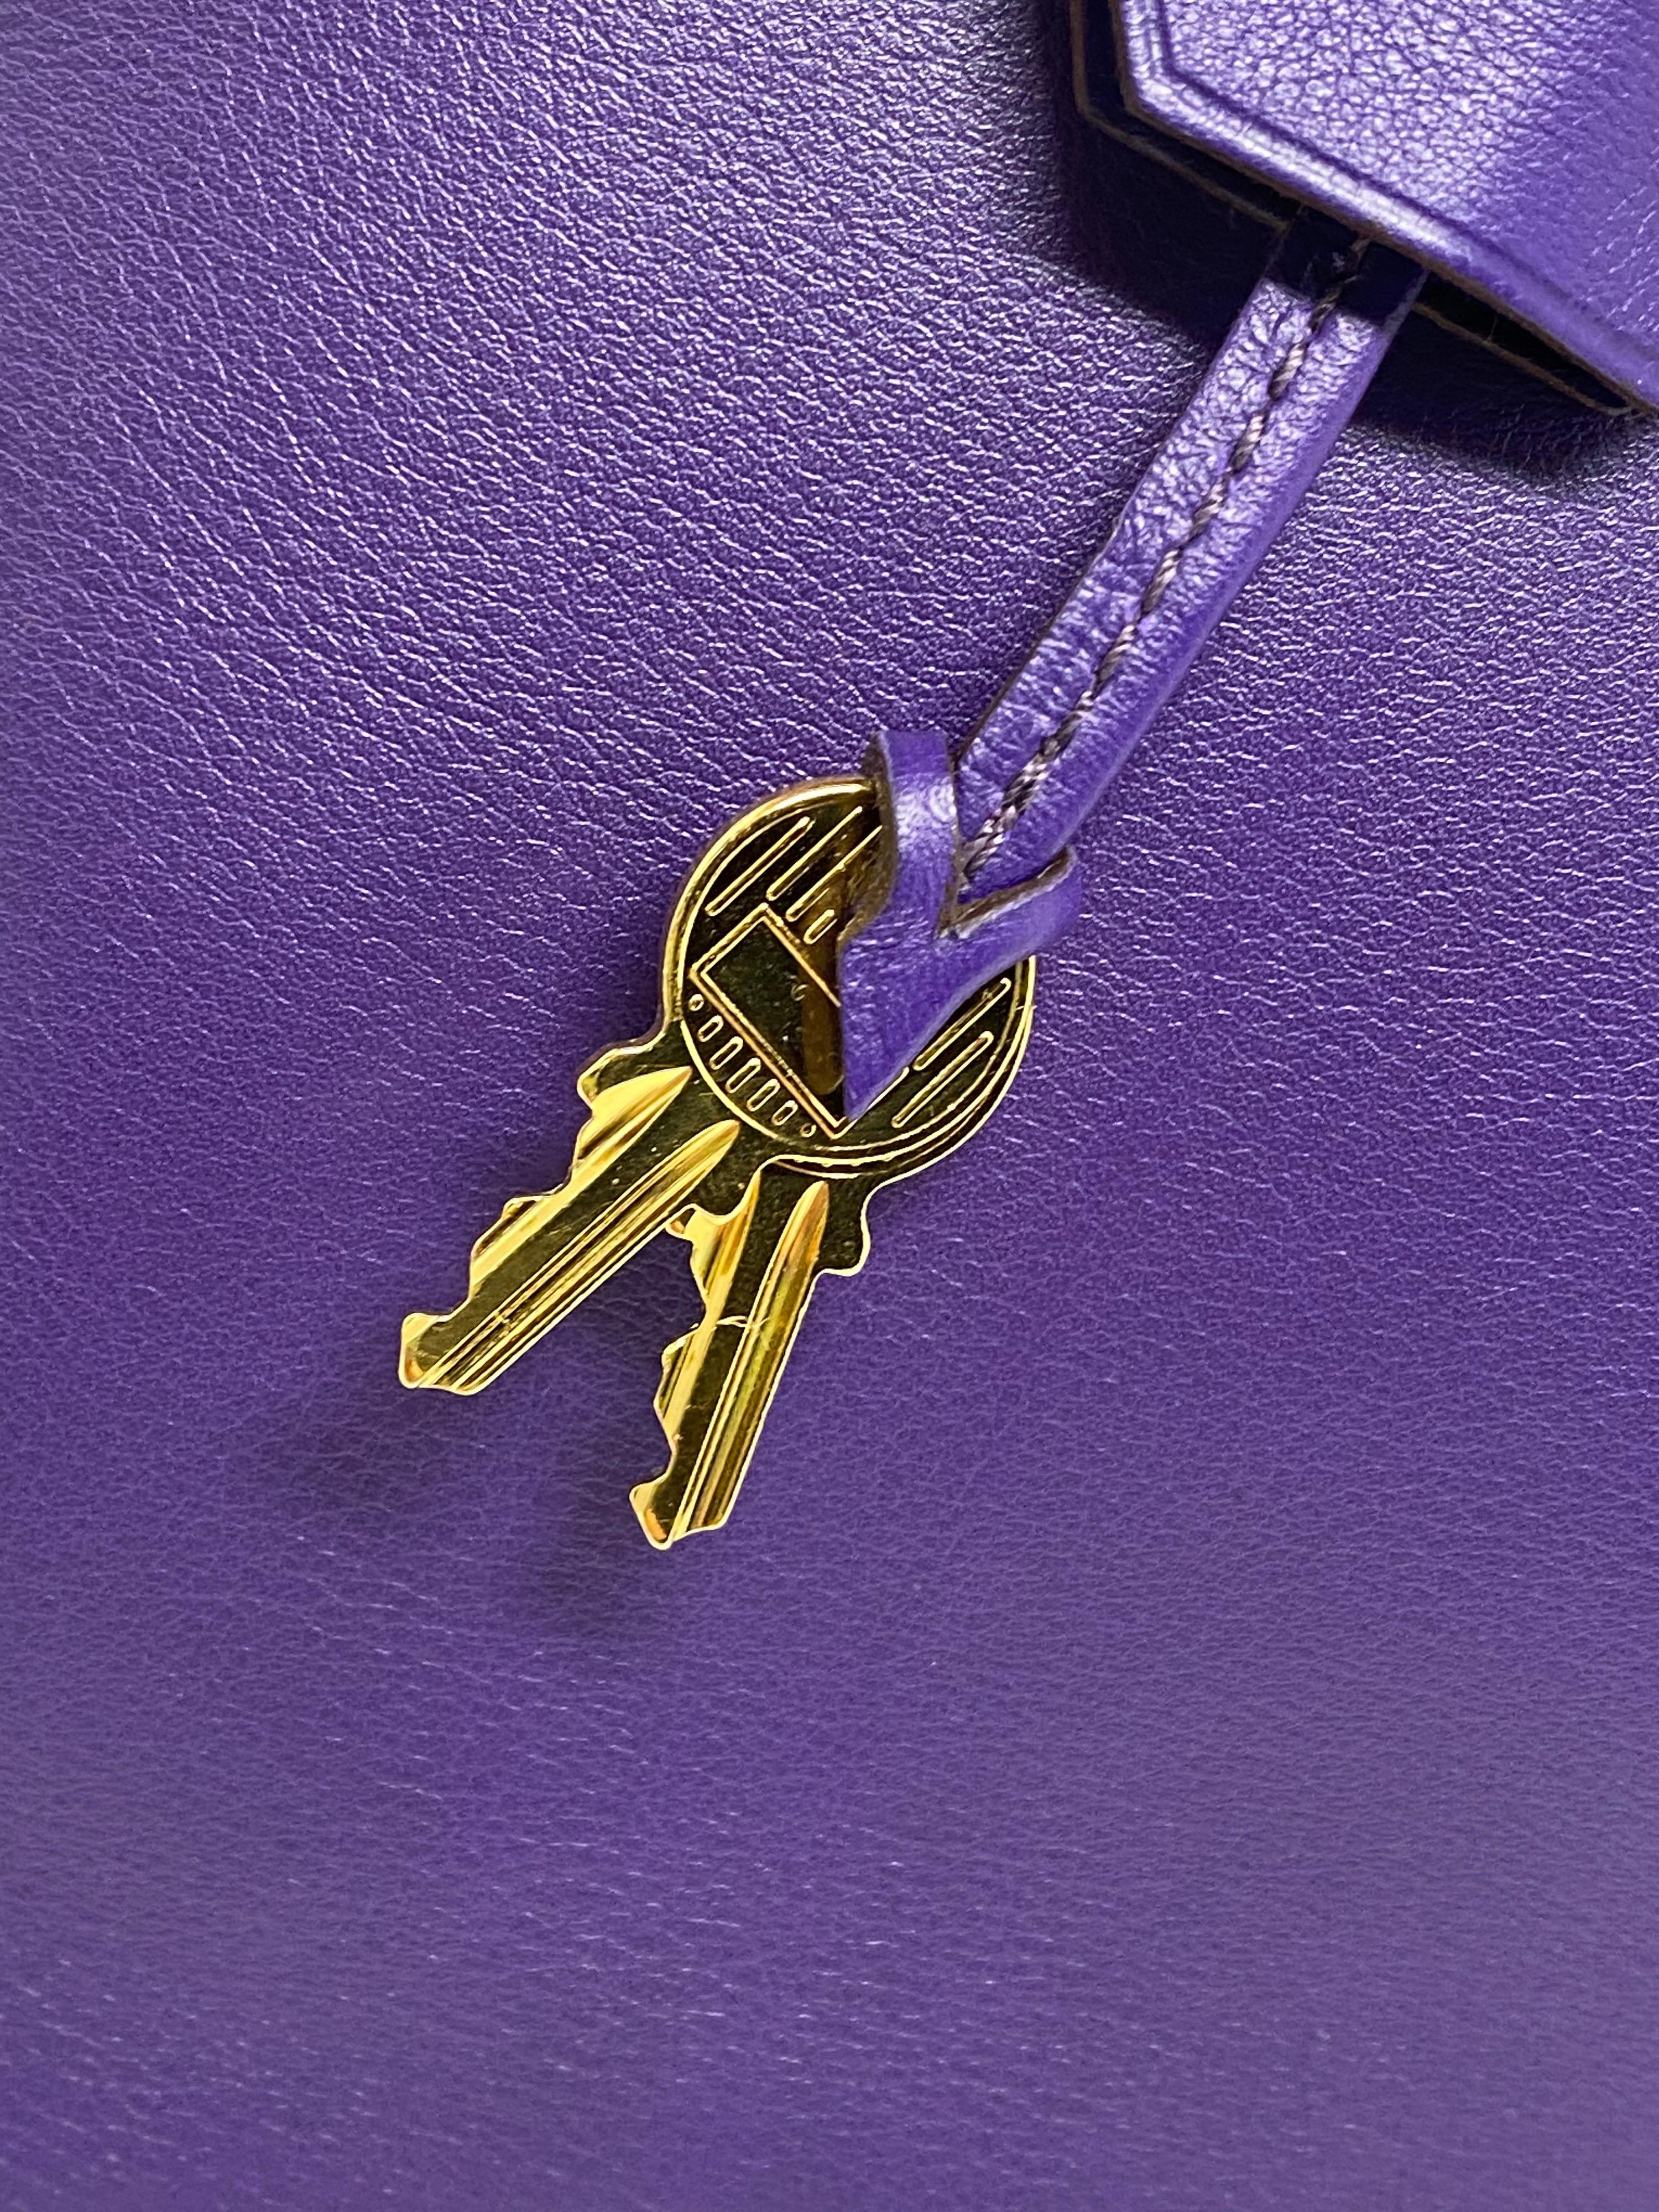 Hermes Iris Purple Birkin 35 Bag. Beautiful color and swift leather with gold hardware. Excellent condition. Rare and hard to find color. Plastic is still on gold hardware. Includes clochette, locks, and keys. Dust cover included. Guaranteed